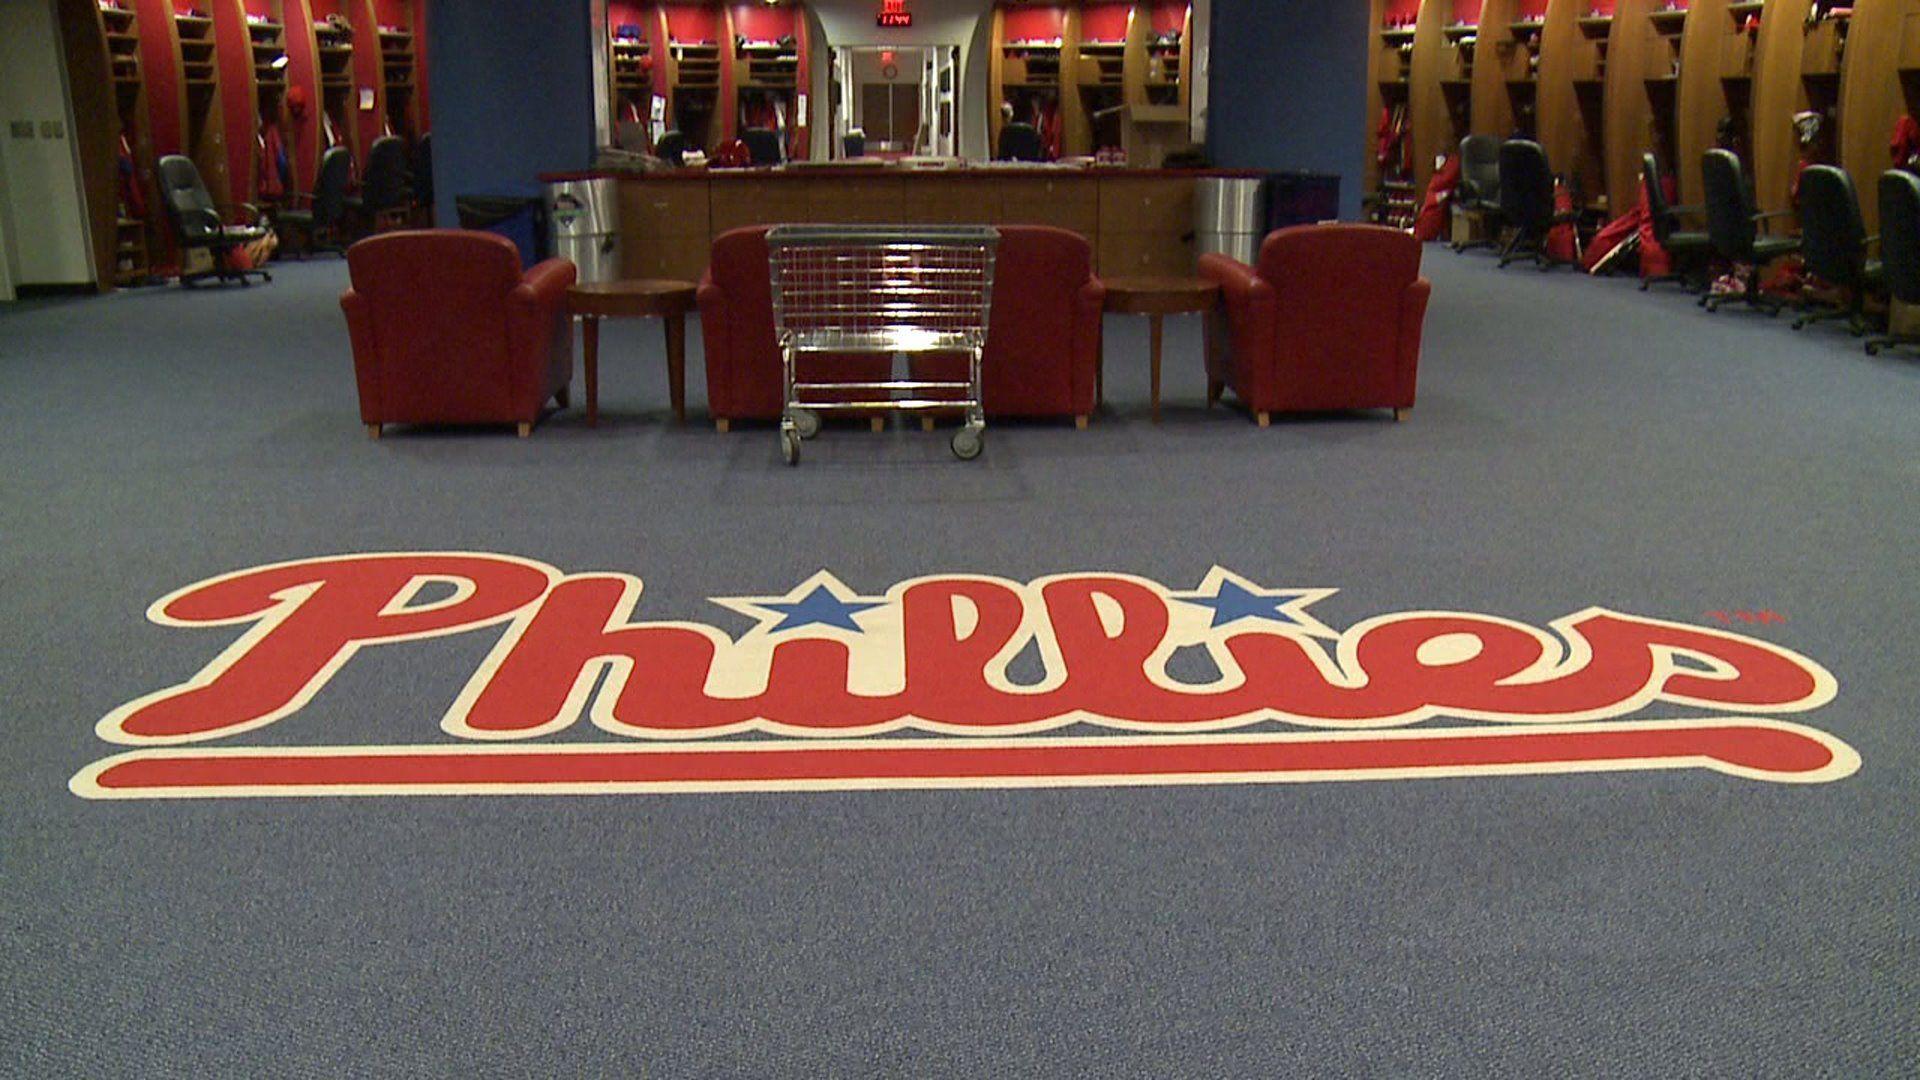 Phillies Restricted Access